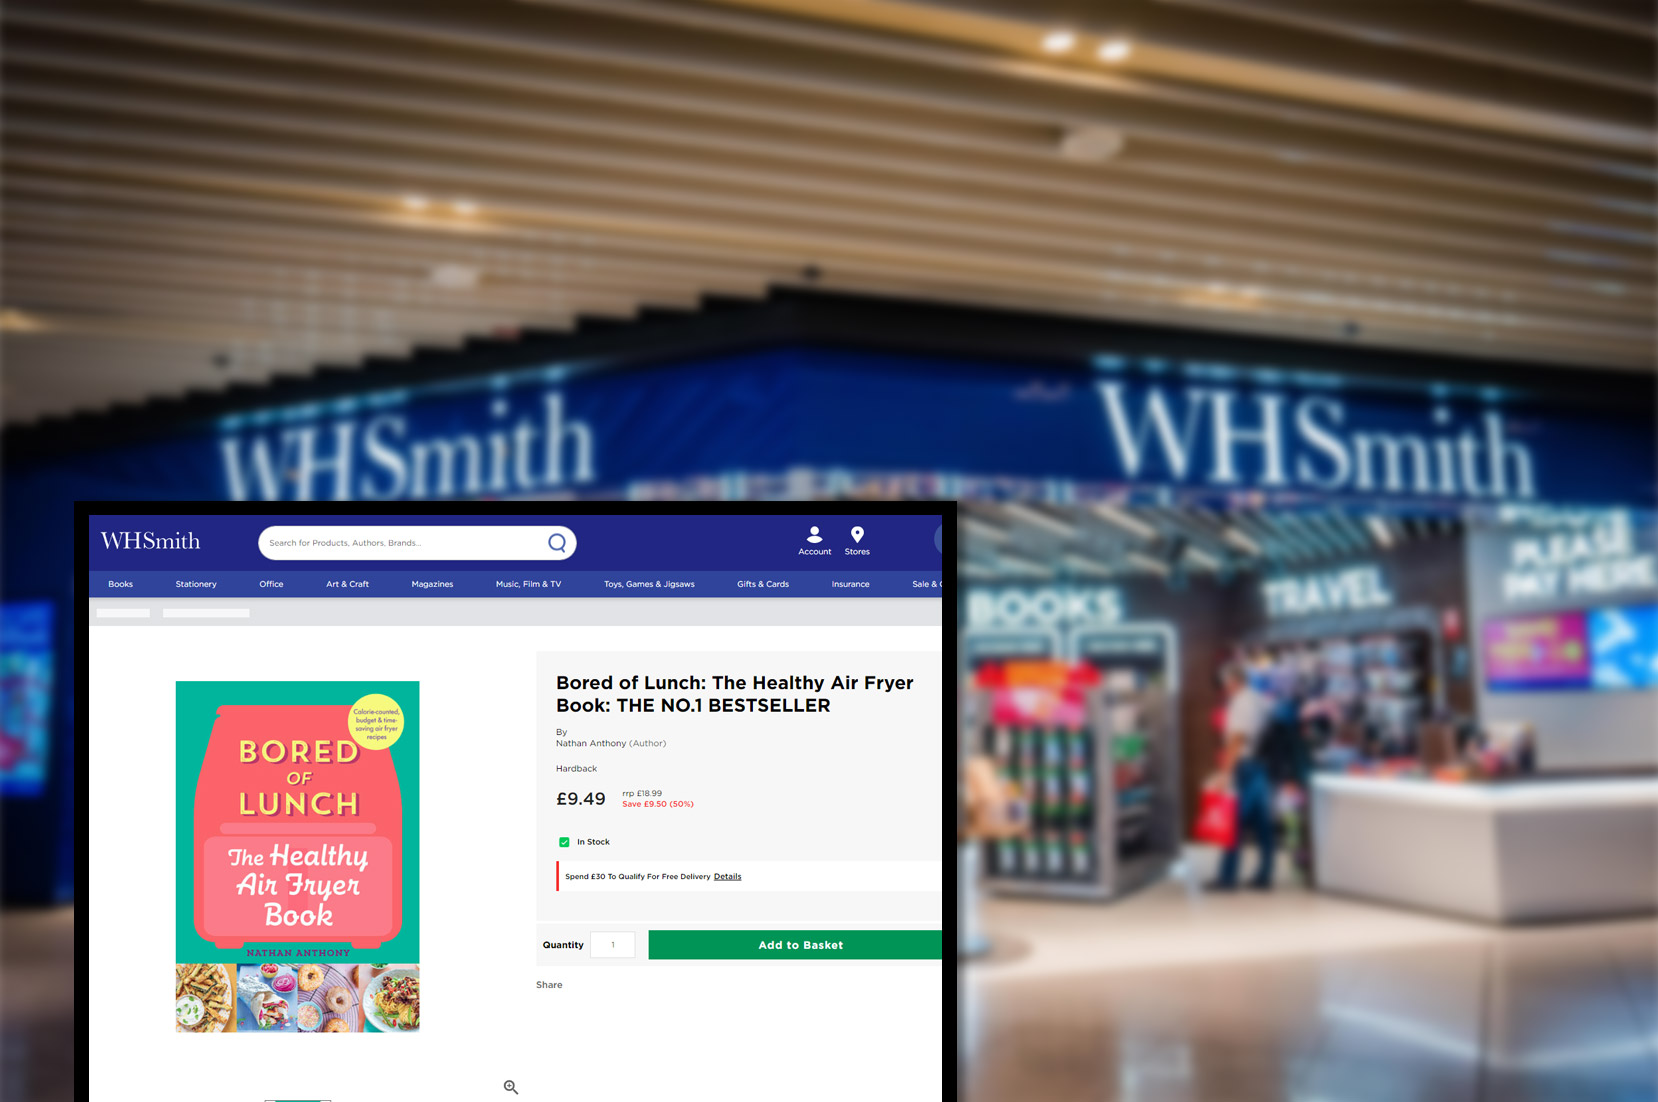 whsmith-co-ukproduct-pricing-information-and-image-scraping-services